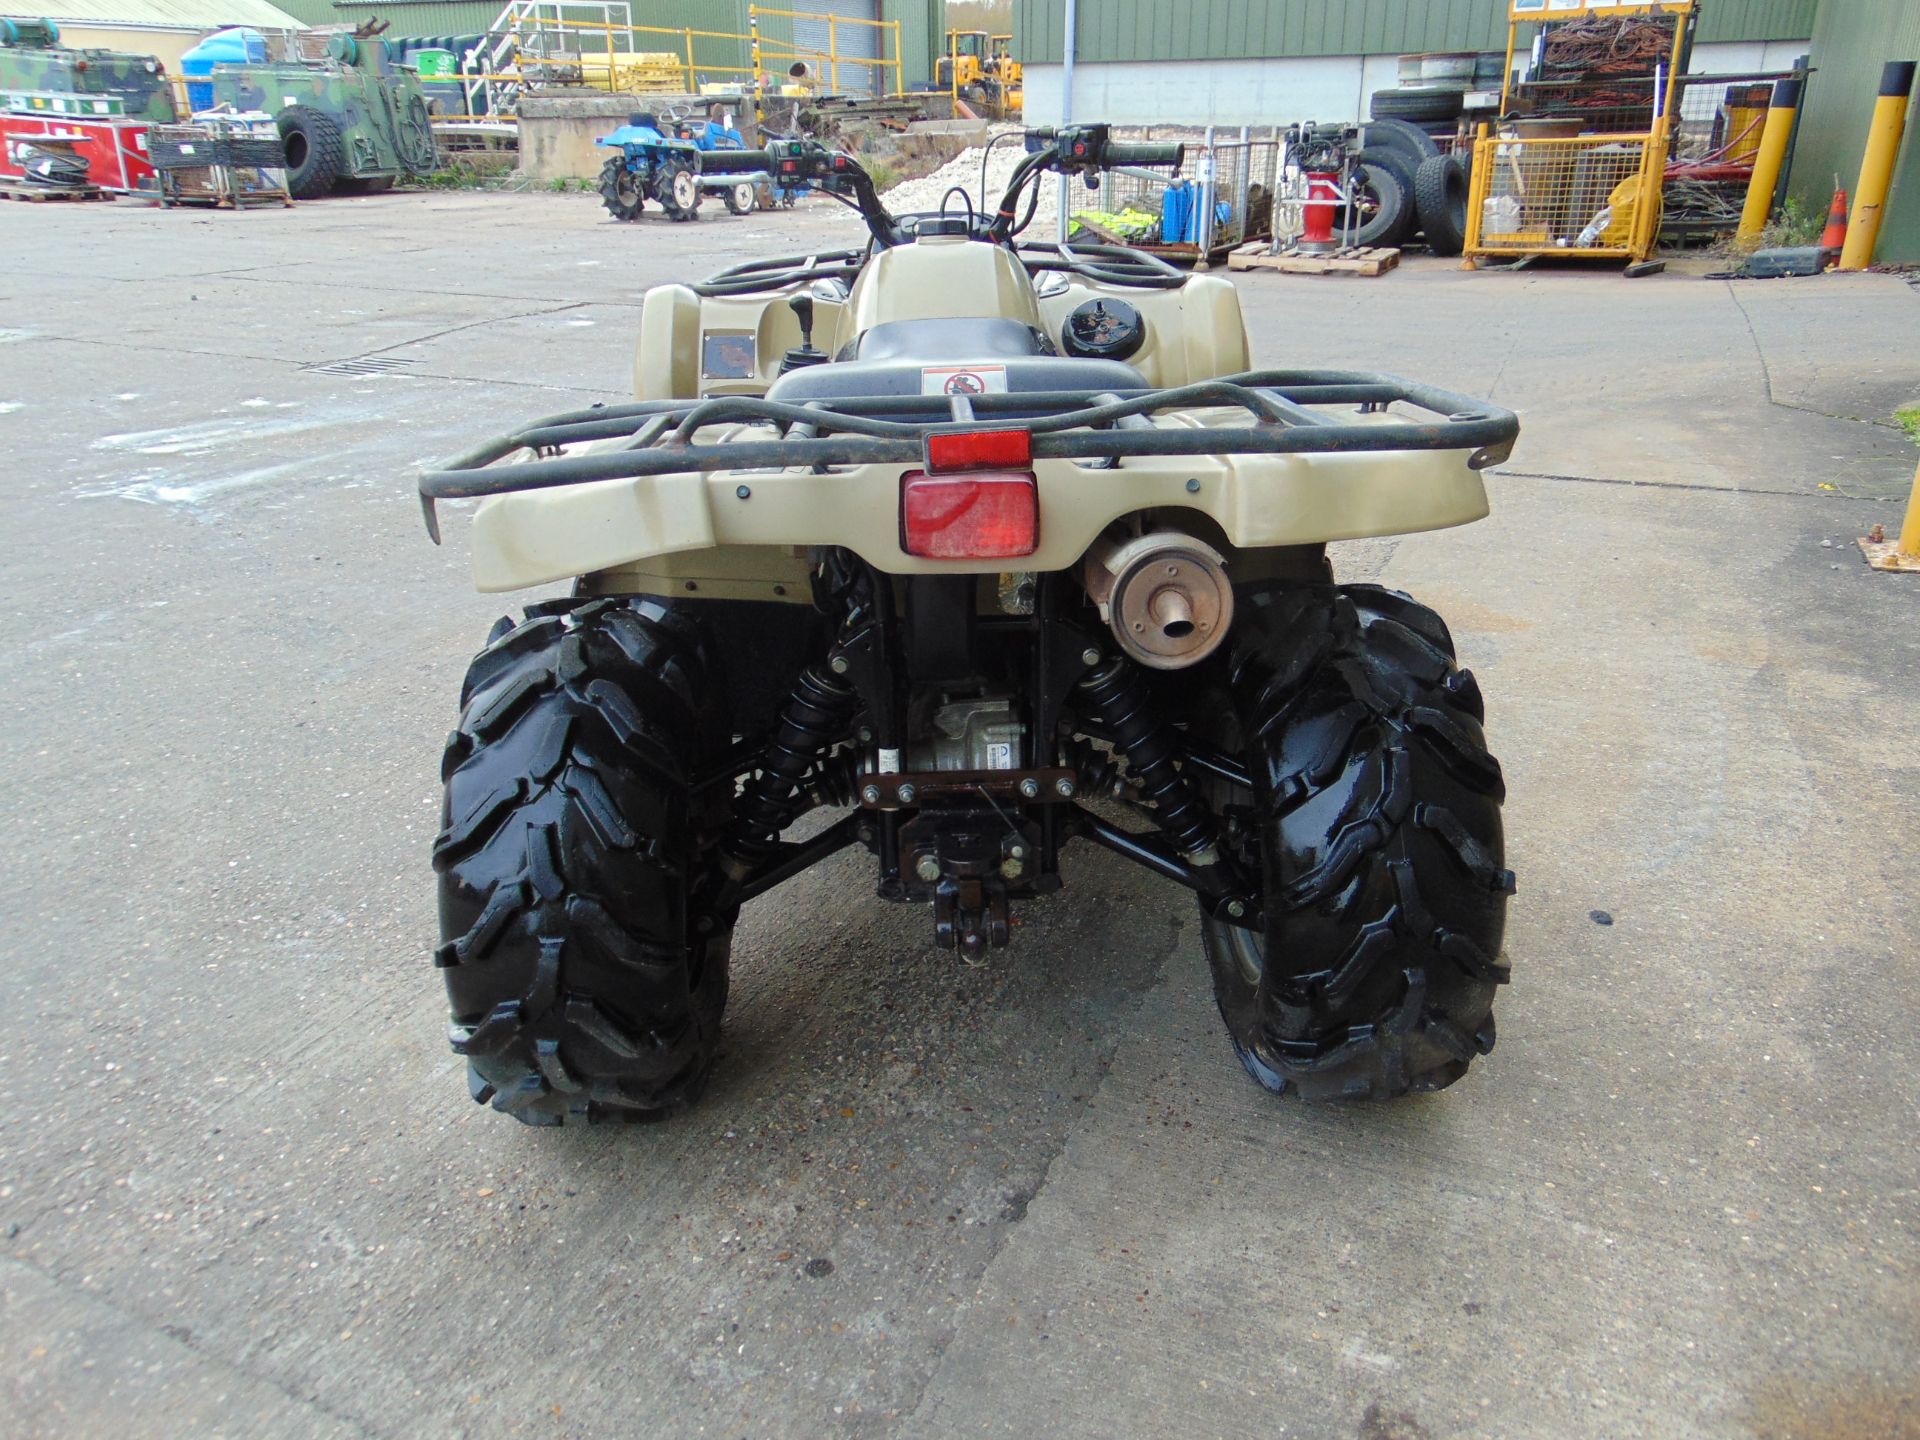 Recent Release Military Specification Yamaha Grizzly 450 4 x 4 ATV Quad Bike - Image 7 of 15